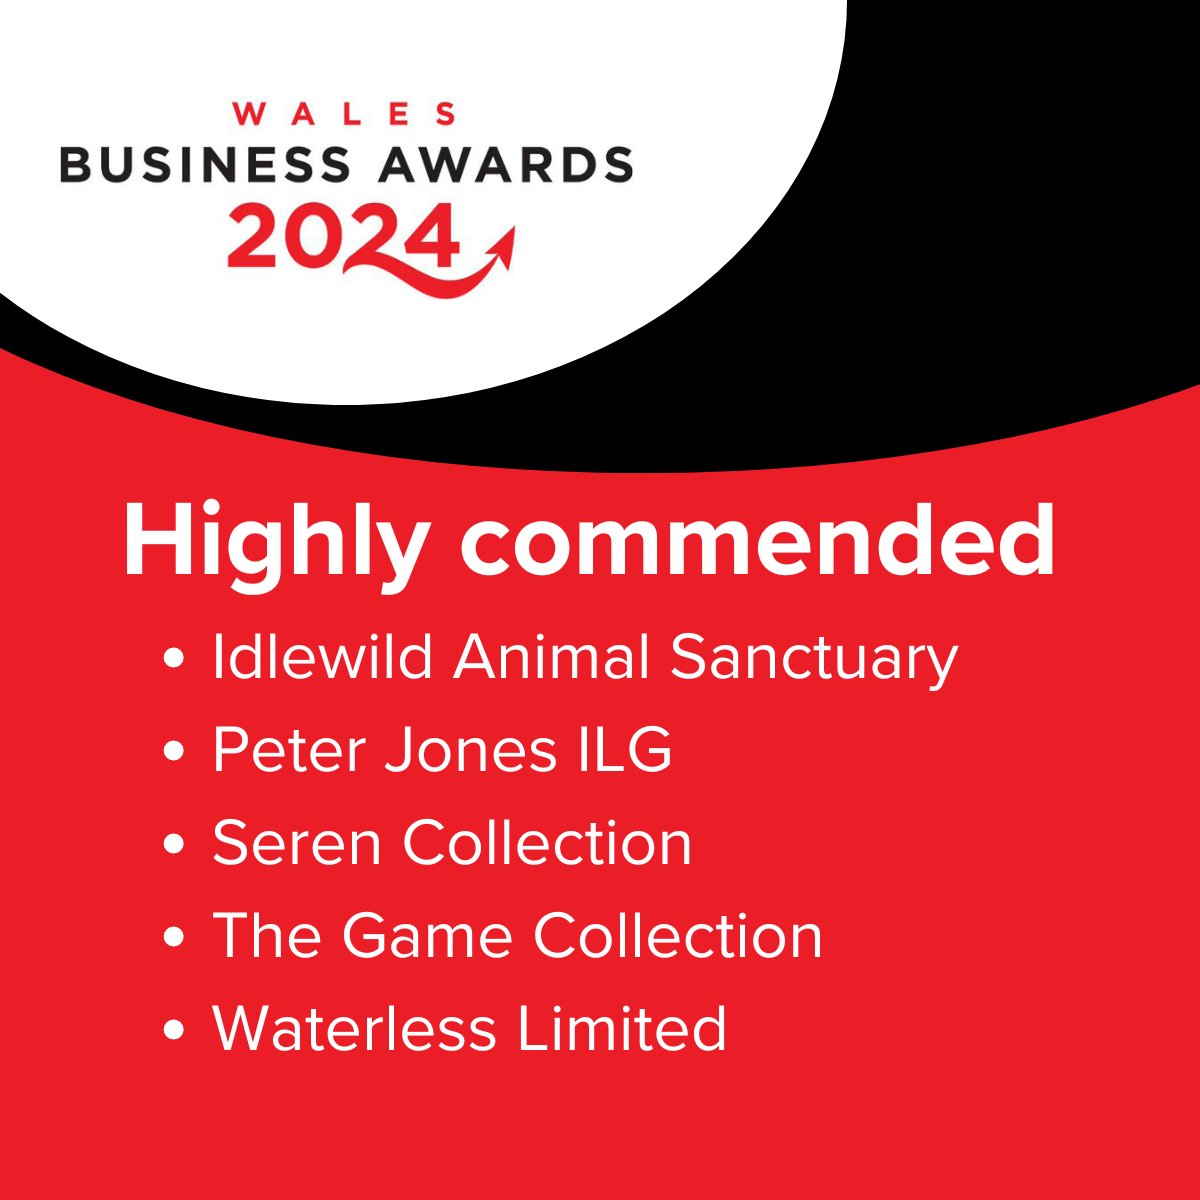 Well done to the businesses who were highly commended at the Wales Business Awards: @CaseUKLimited, @game_collection, @Aspire2be, @CanSenseLtd, Waterless Limited, Seren Collection, @Deaffriendly1, @DaroganTalent, @AnimalIdlewild, @PeterJonesILG and Euroclad Group.